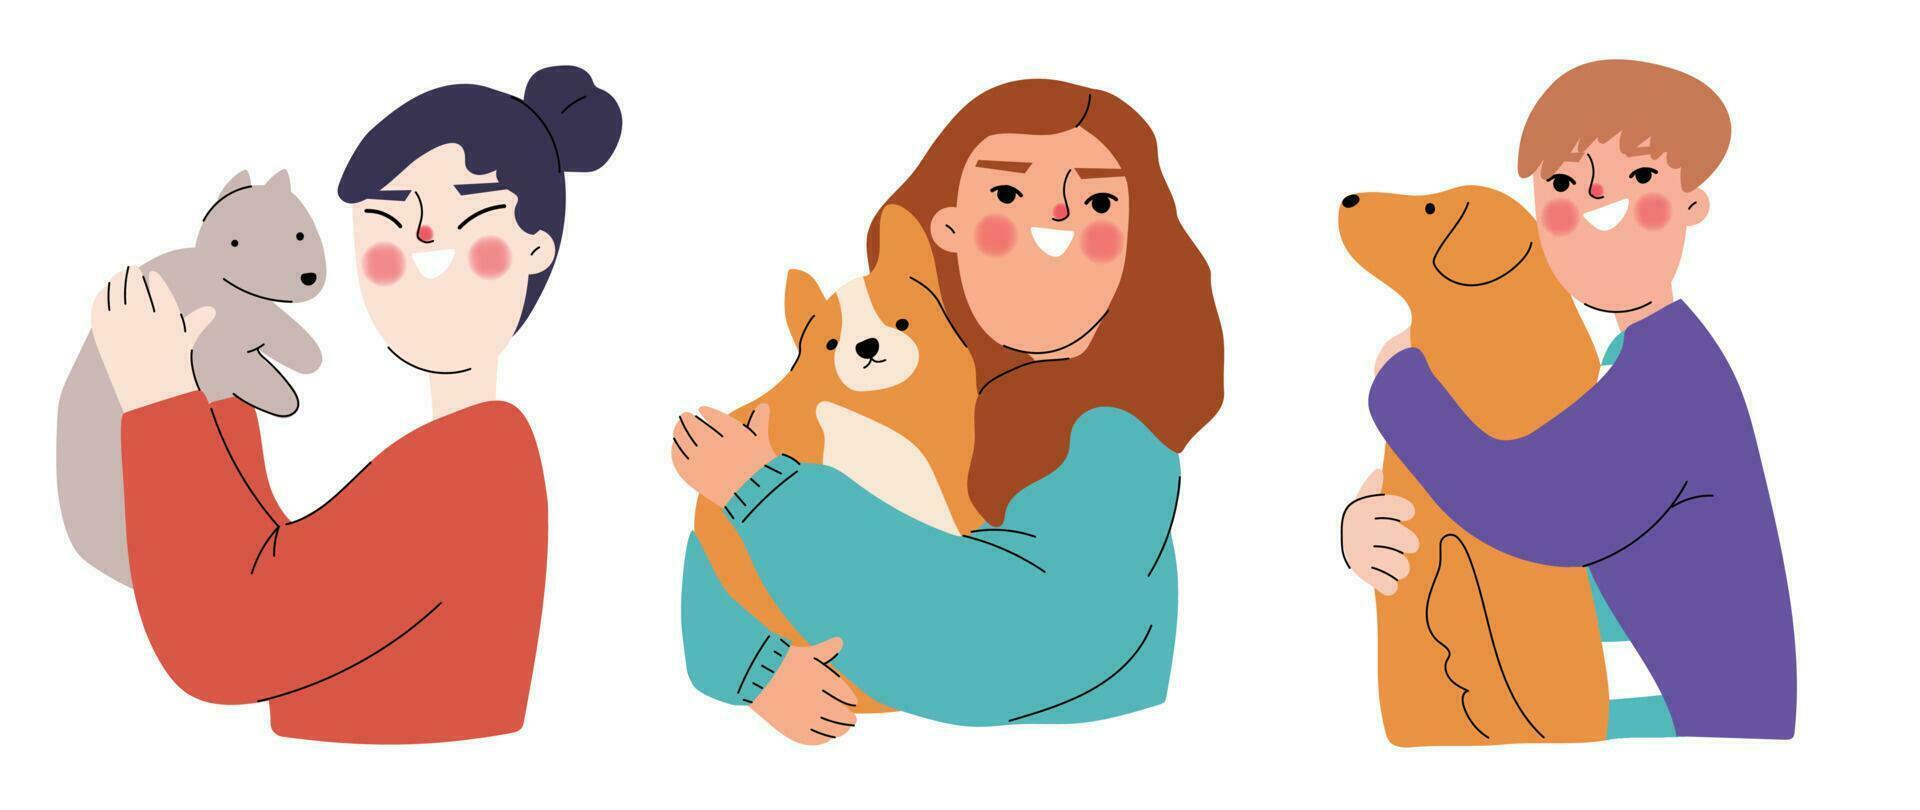 Set of Happy owner and pet concept vector. Flat cartoon characters collection with women, men hugging, hold their dogs. Dog and peoples illustration design for decoration, cover, website, poster. vector